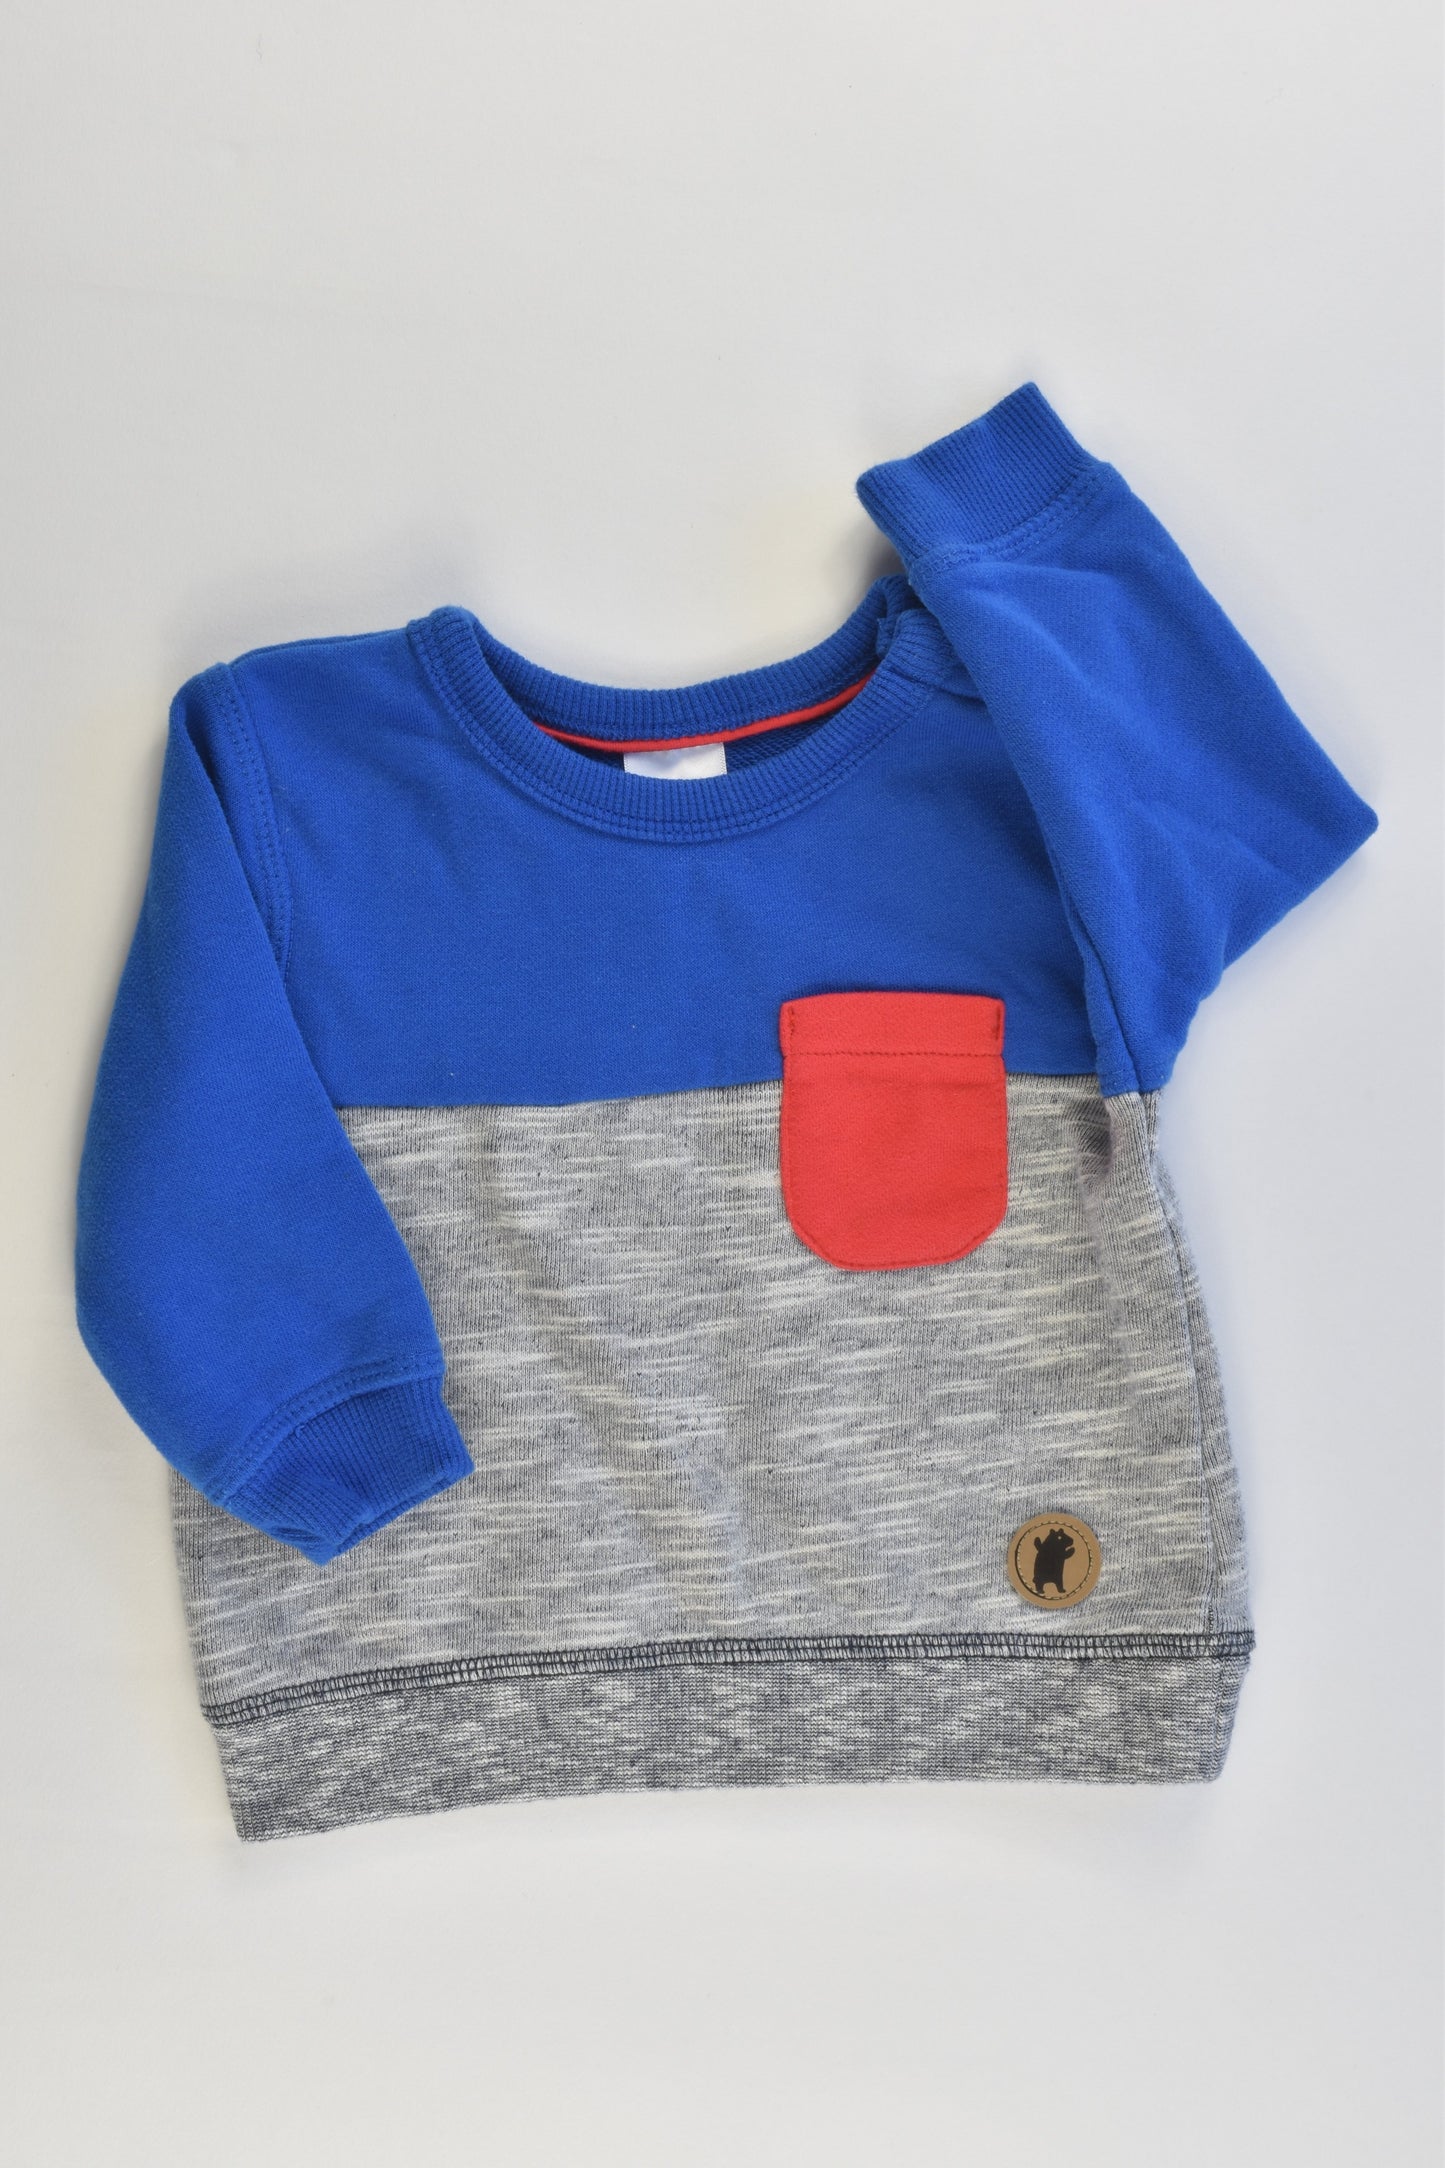 Target Size 00 (3-6 months) Sweater